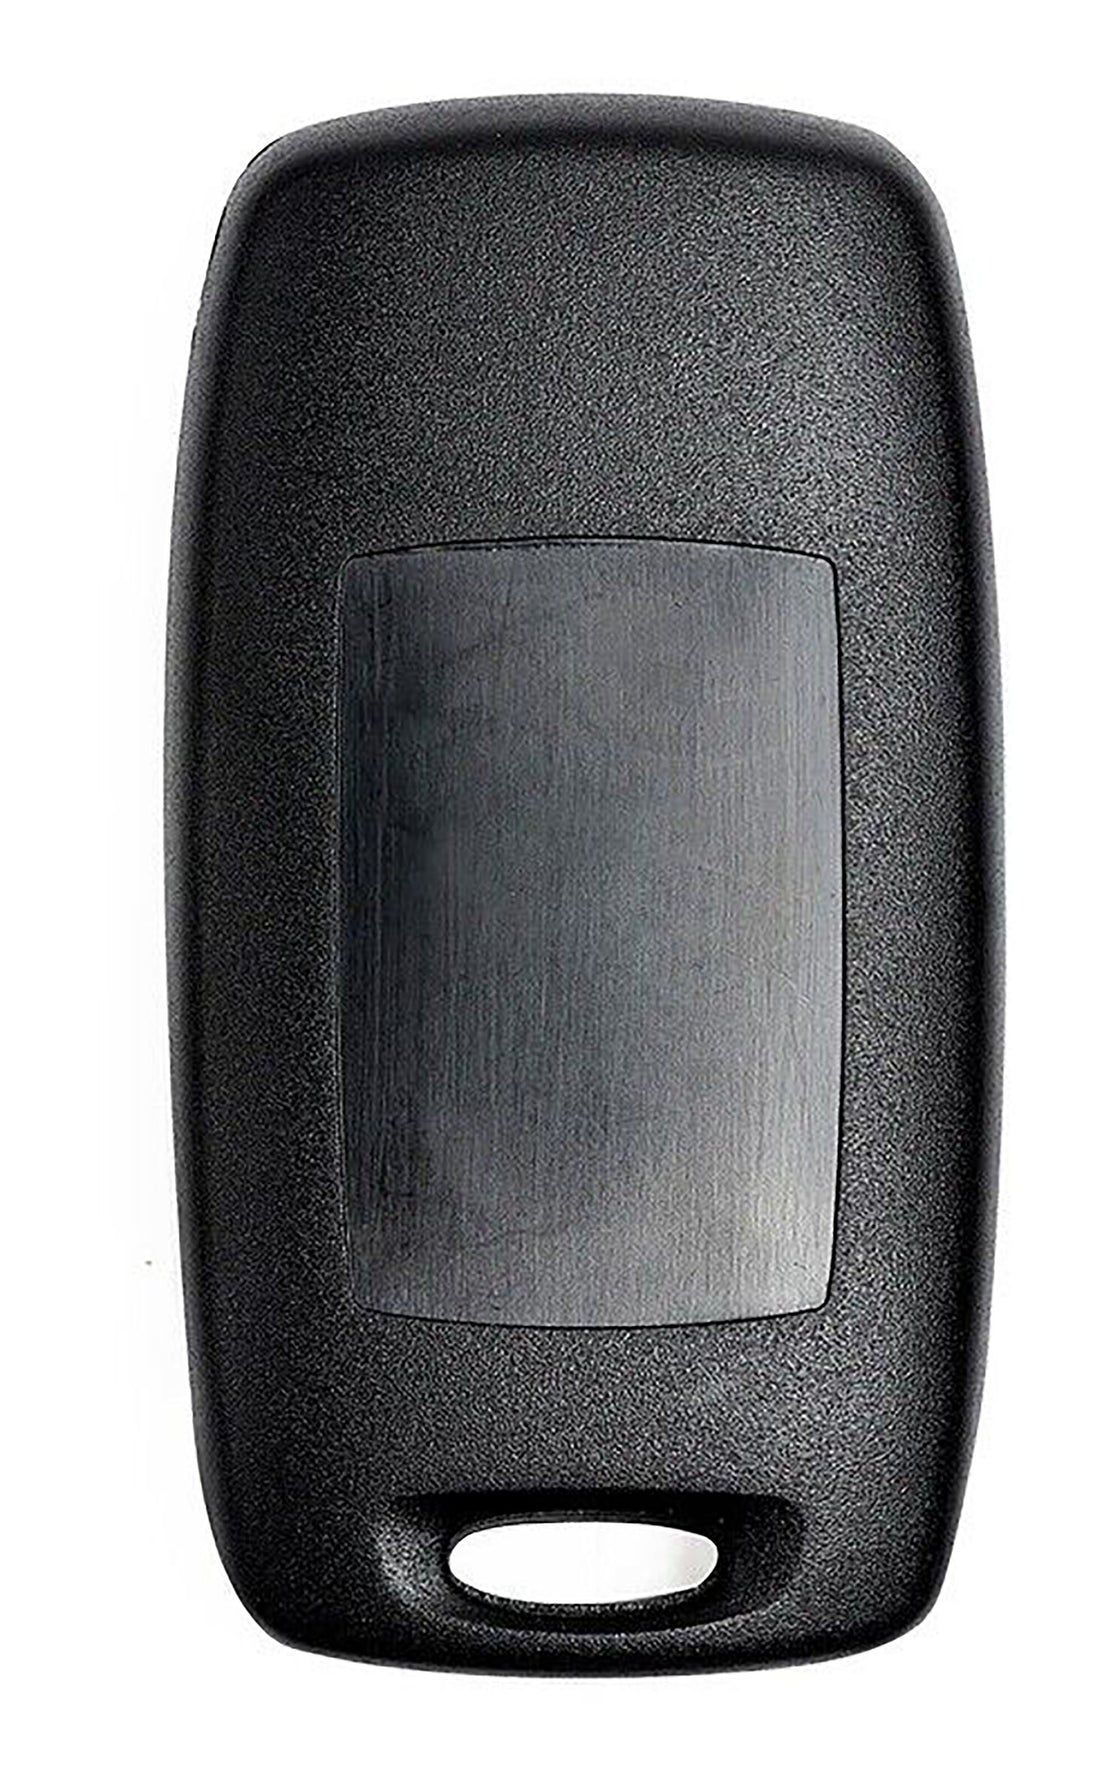 1x New Replacement Key Fob Remote Compatible with & Fit For Mazda Vehicles (Read Description) - MPN KPU41846-02